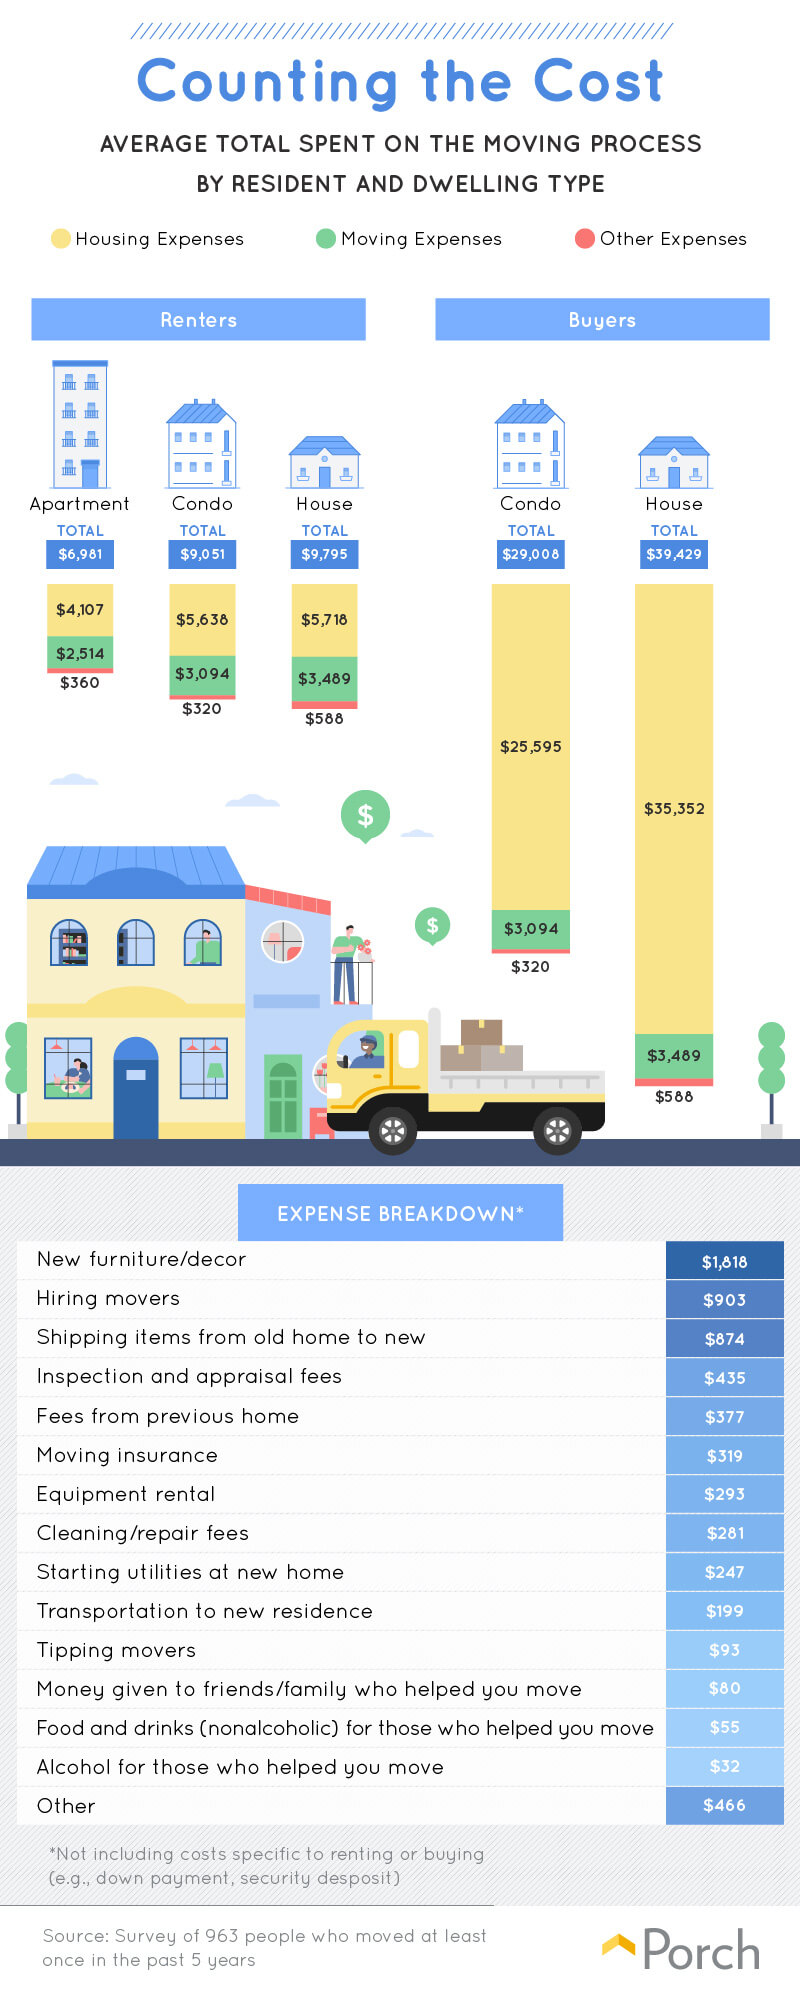 Average total spent on the moving process, by resident and dwelling type